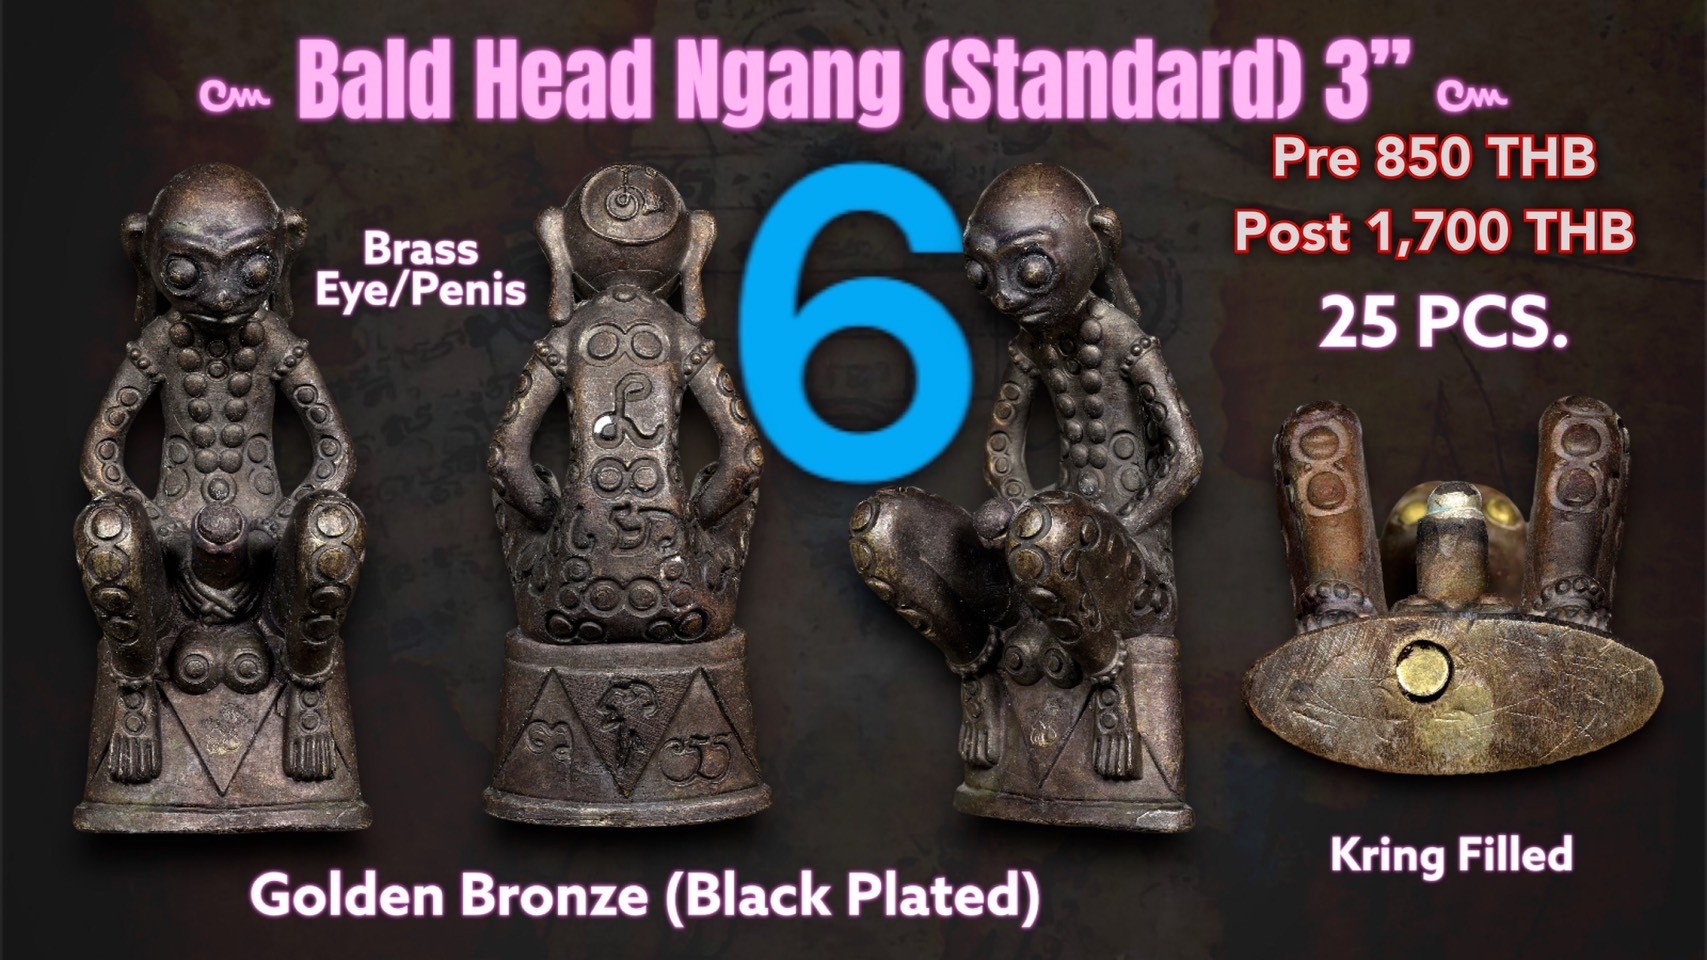 6.Bald Head Ngang Golden Bronze (Black Plated) 3 inches